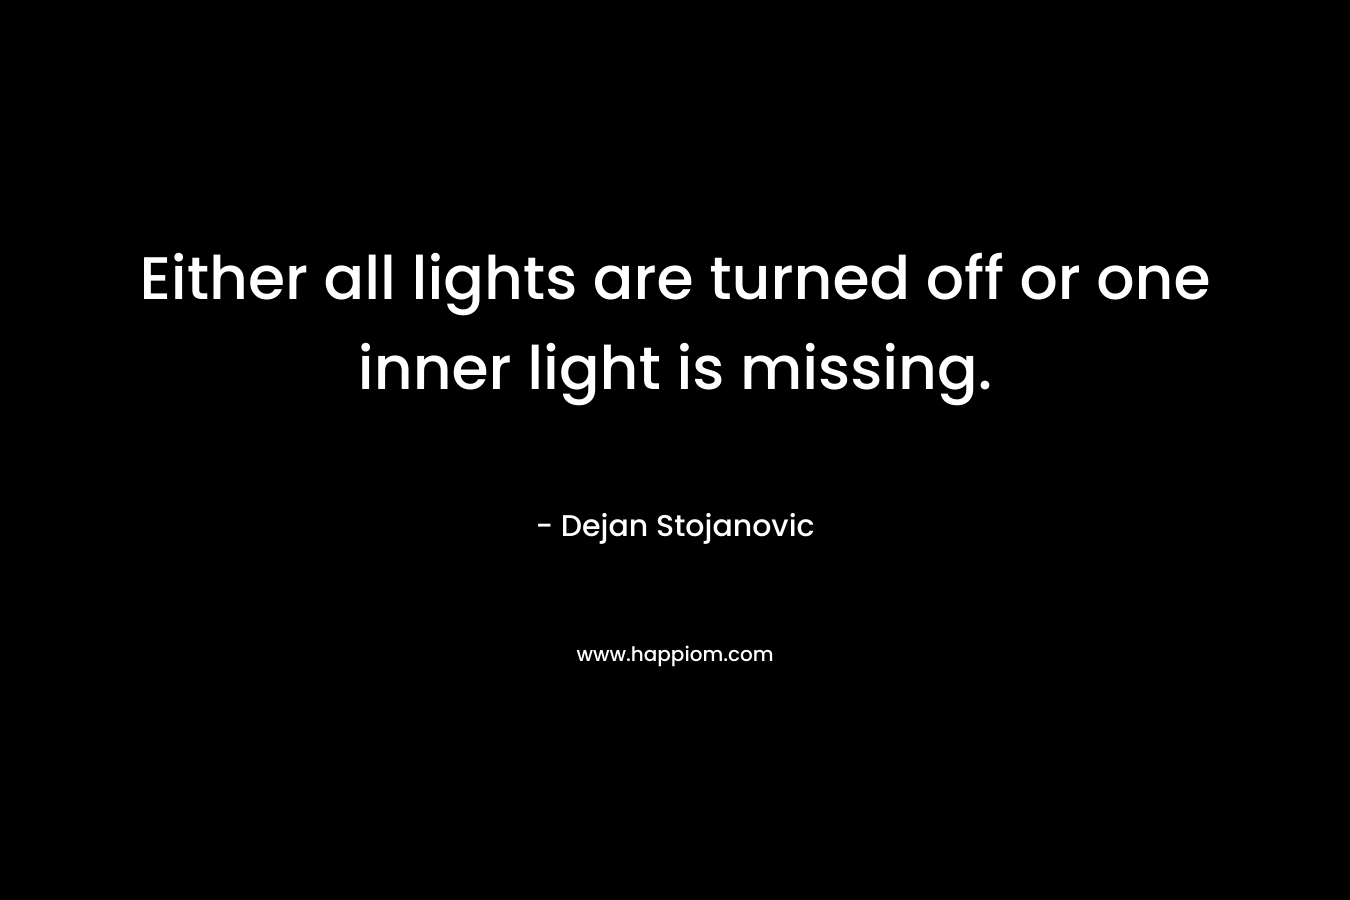 Either all lights are turned off or one inner light is missing.